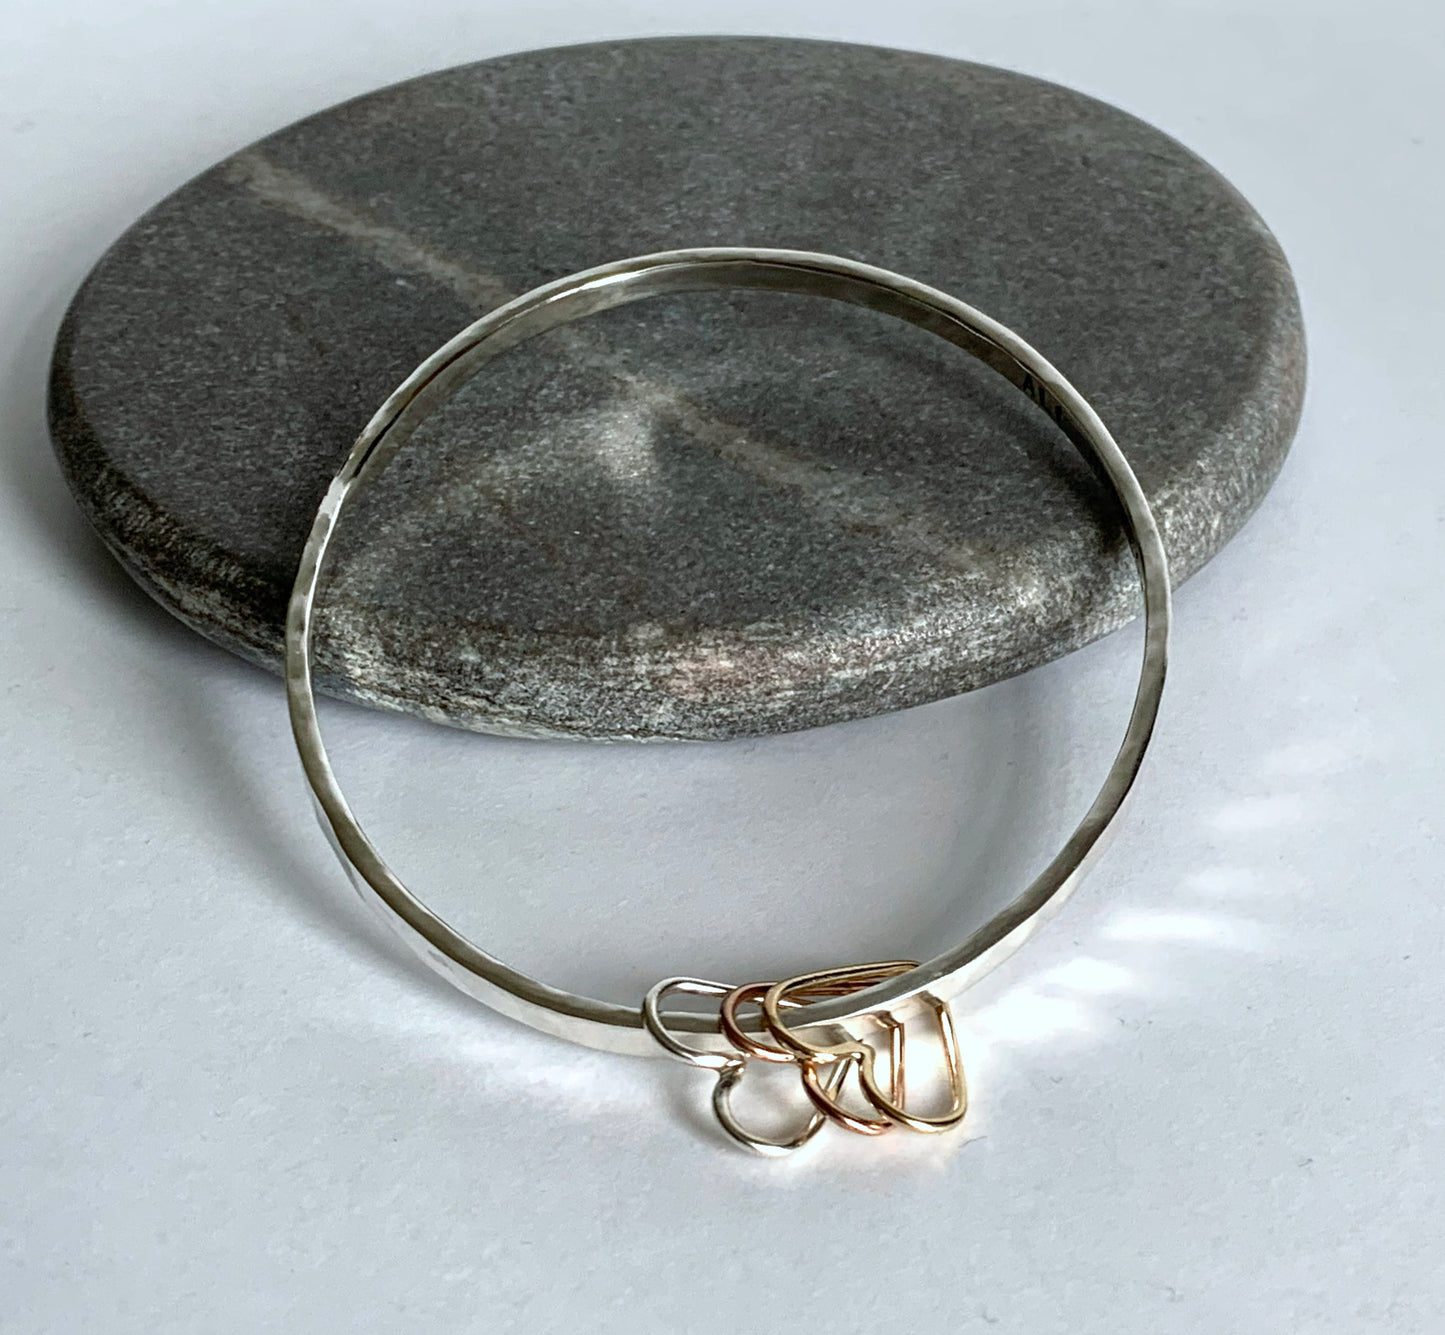 Made to Order - Sterling silver heart bangle